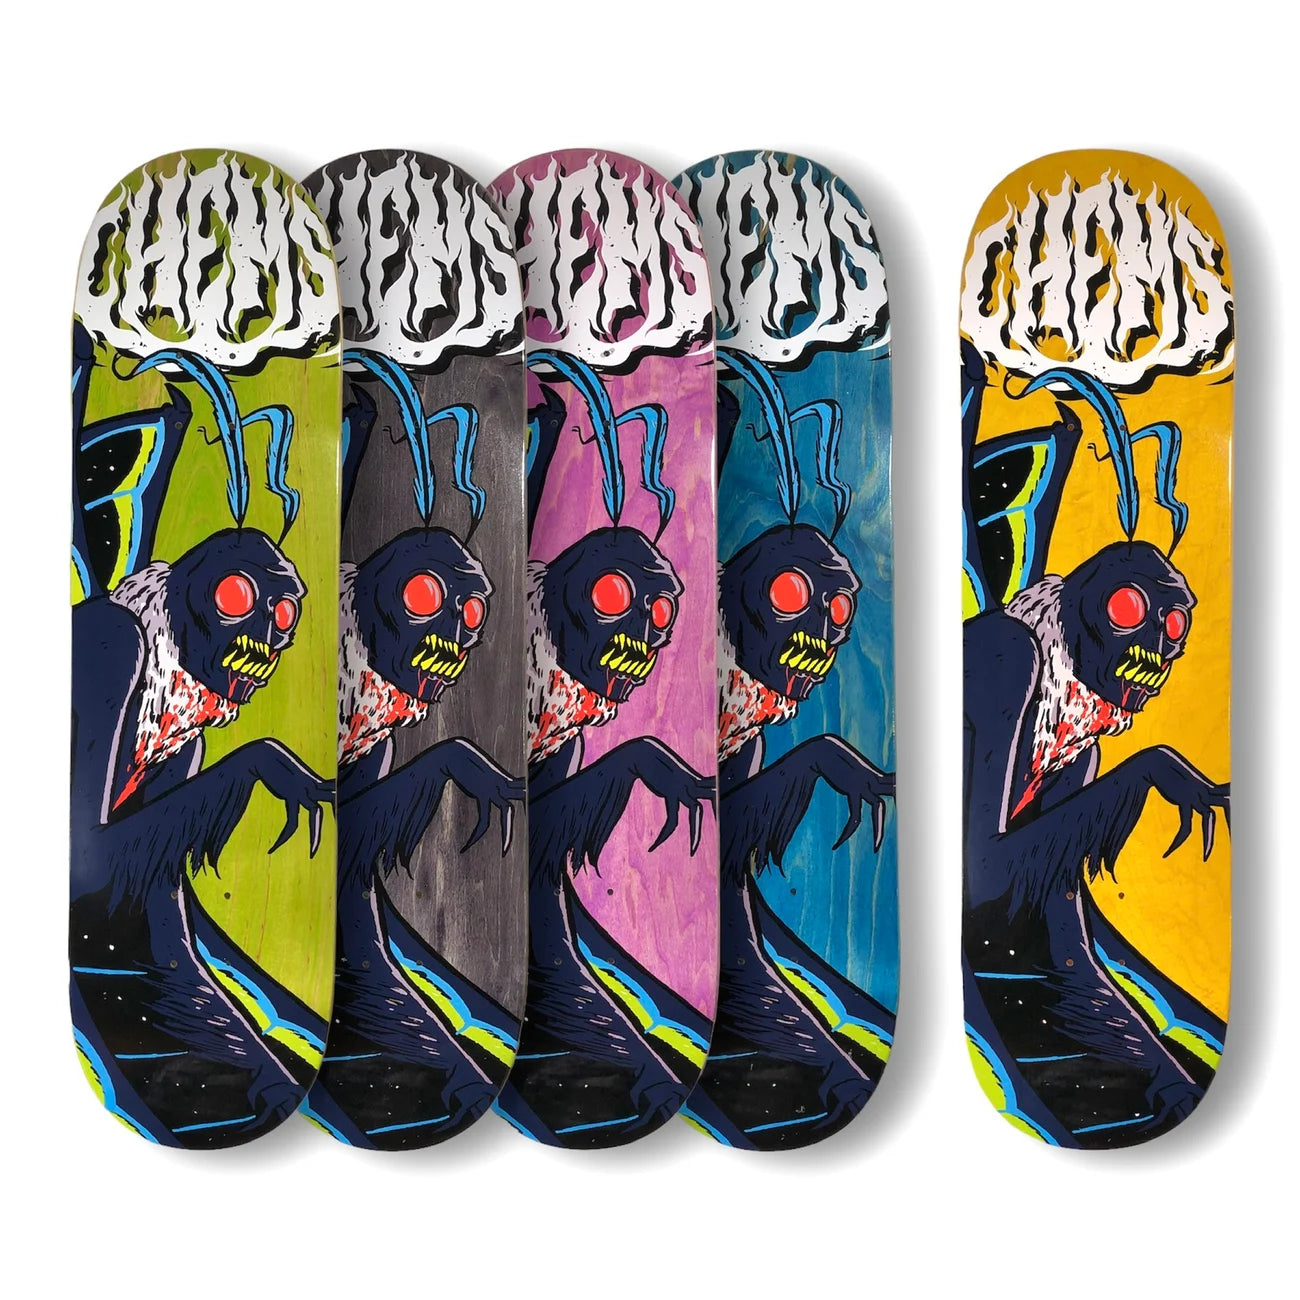 Chems Mothman Skateboard Deck; Available in various background colors; Features a white Chems logo at the top; Depicts a captivating Mothman creature with intense red eyes; Striking design for an eye-catching and unique skateboard deck; Durable construction for reliable performance and longevity.